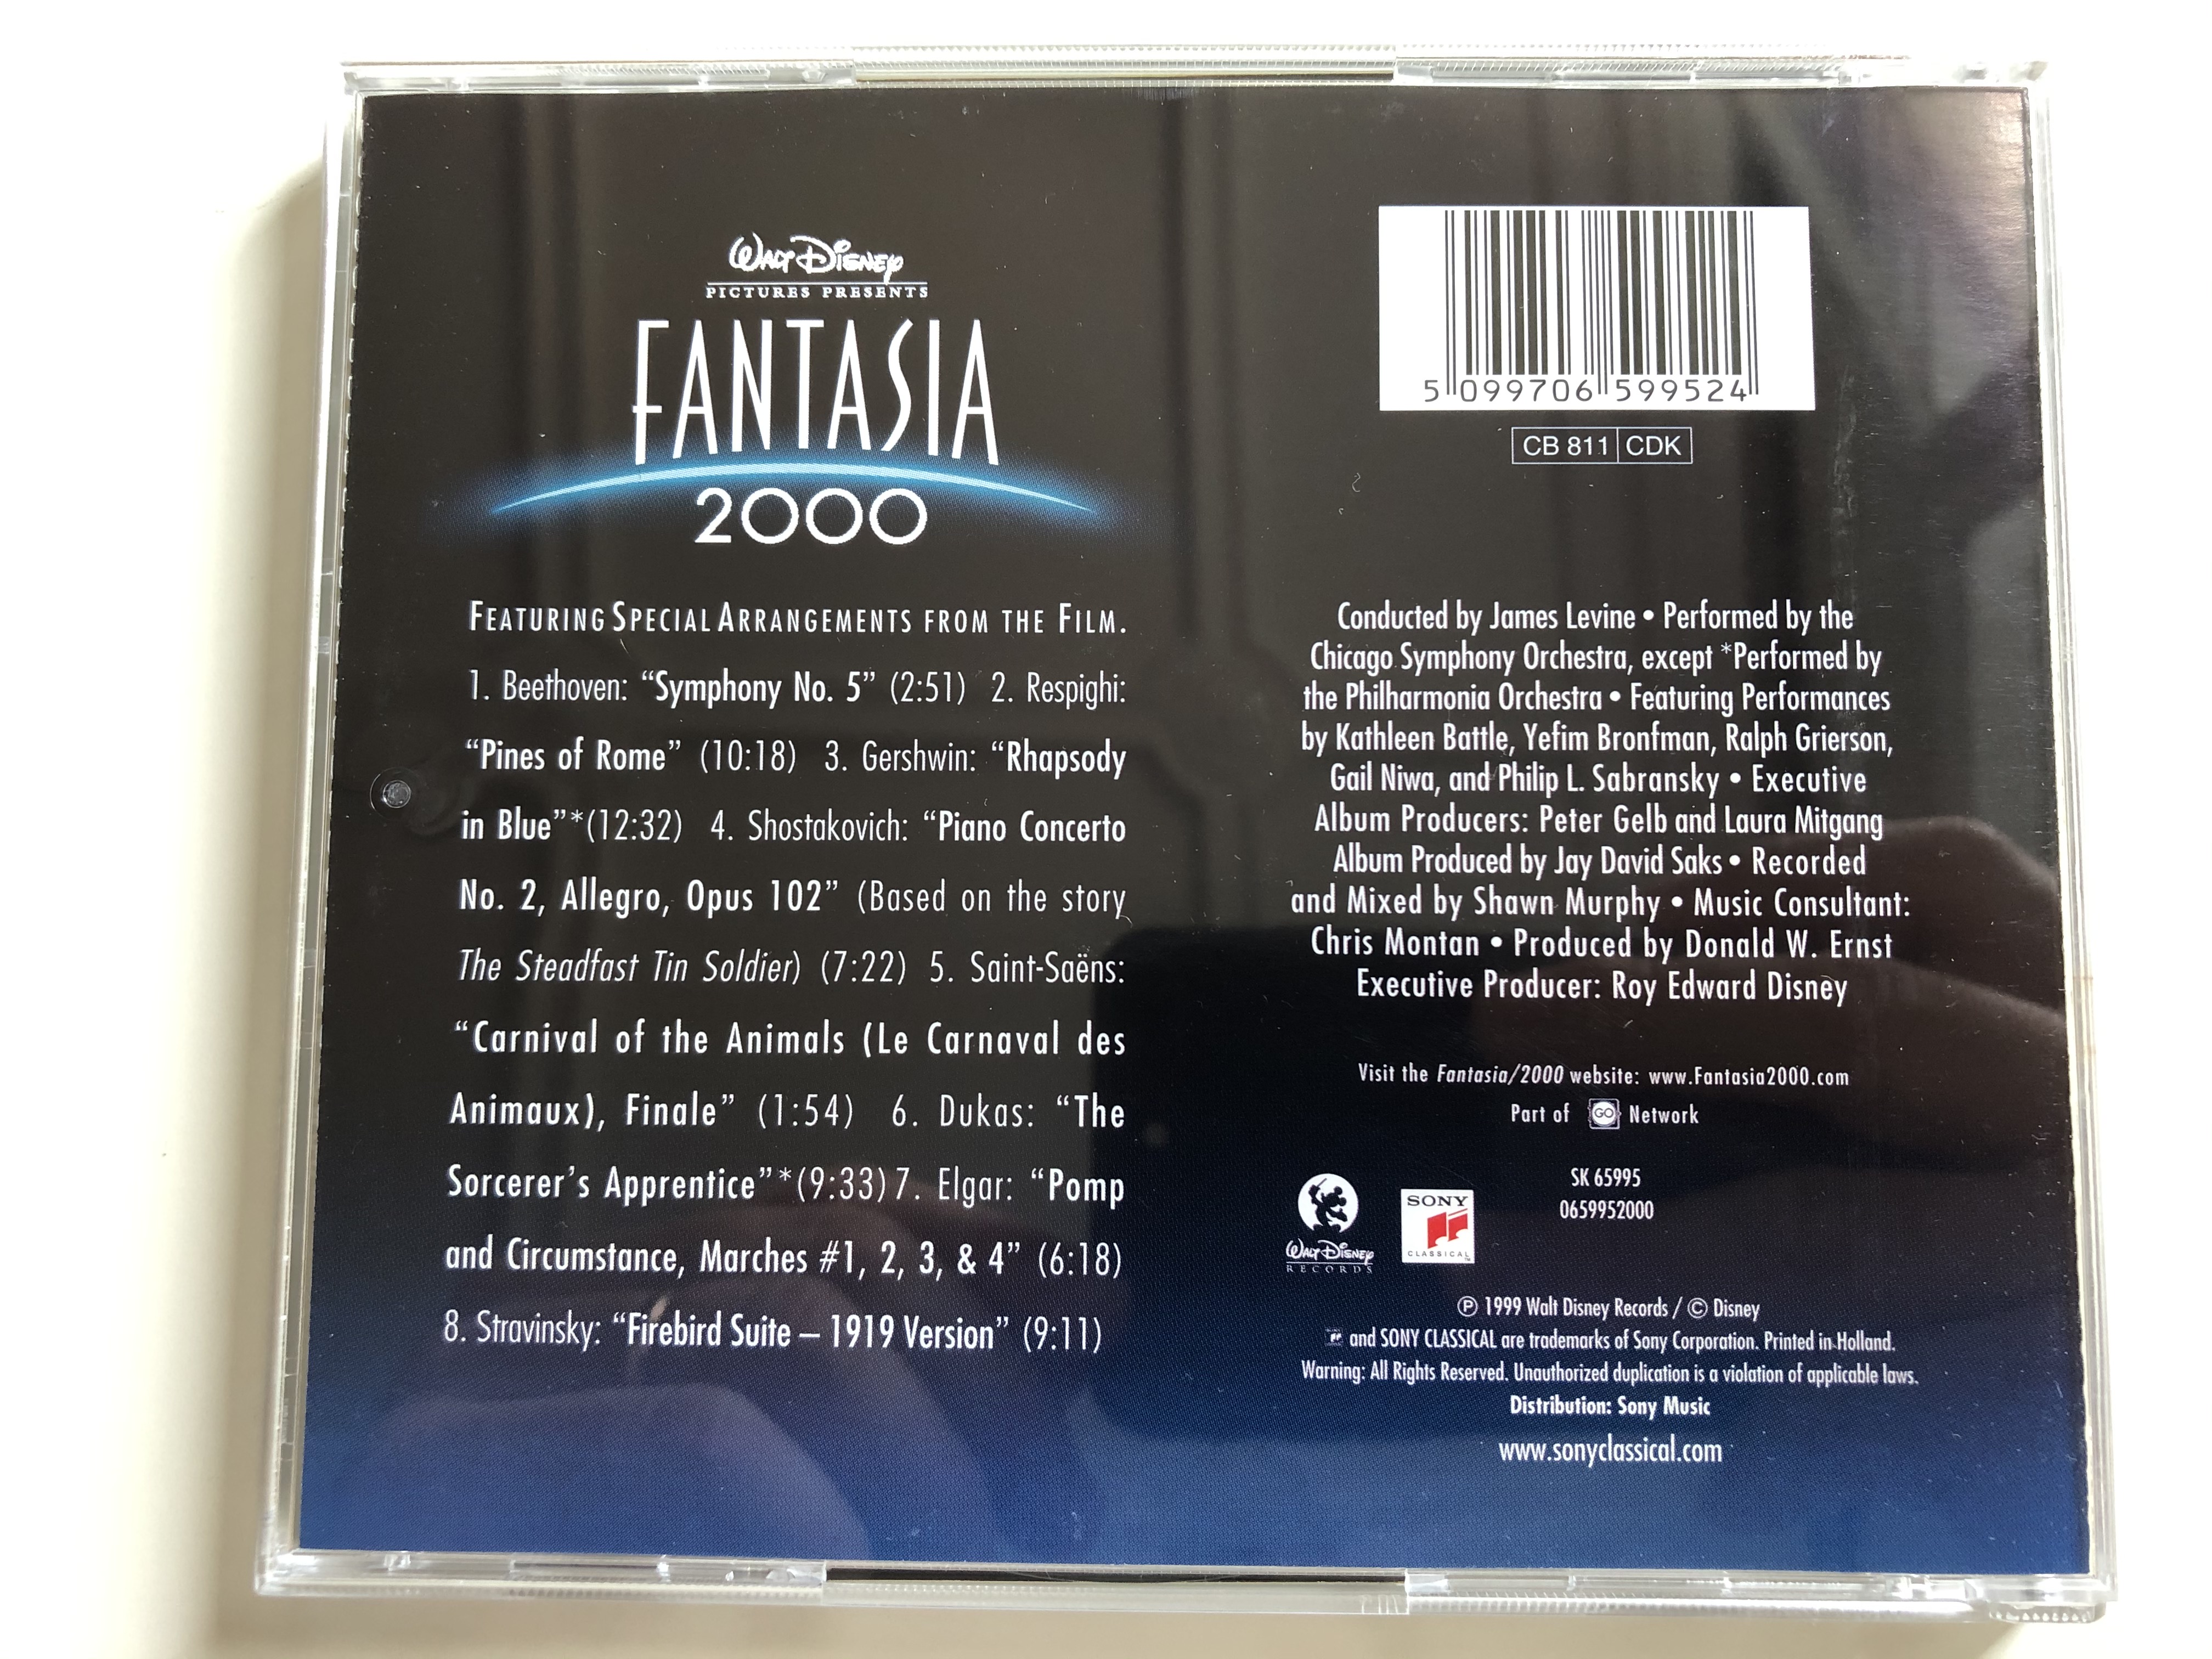 fantasia-2000-conducted-james-levine-the-chicago-symphony-orchestra-walt-disney-records-audio-cd-1999-sk-65995-11-.jpg